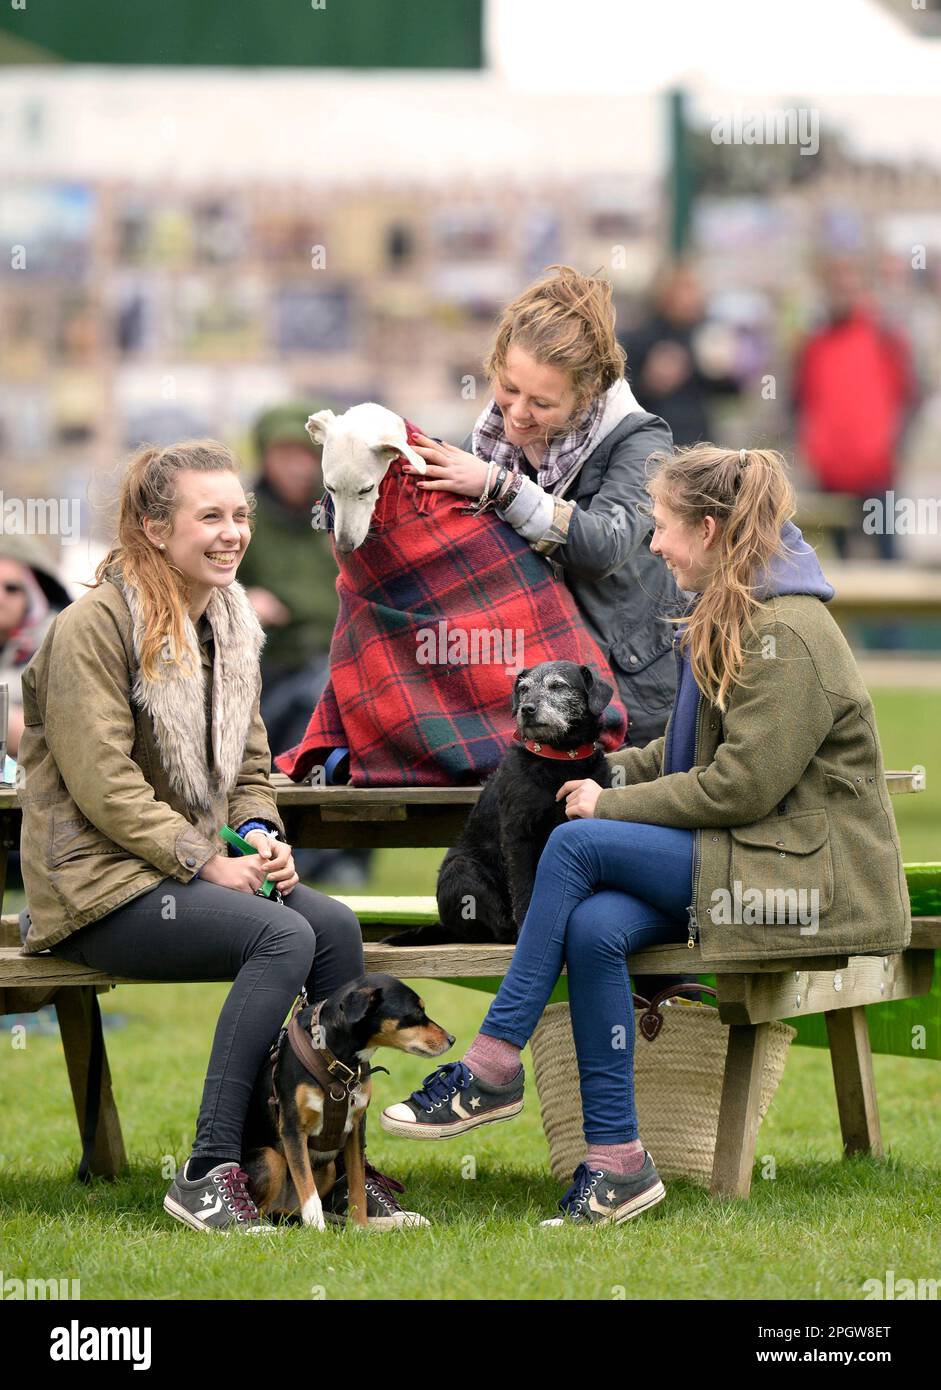 A Greyhound dog wrapped up in a rug from the rain at The Badminton Horse Trials in Gloucestershire, UK. Stock Photo